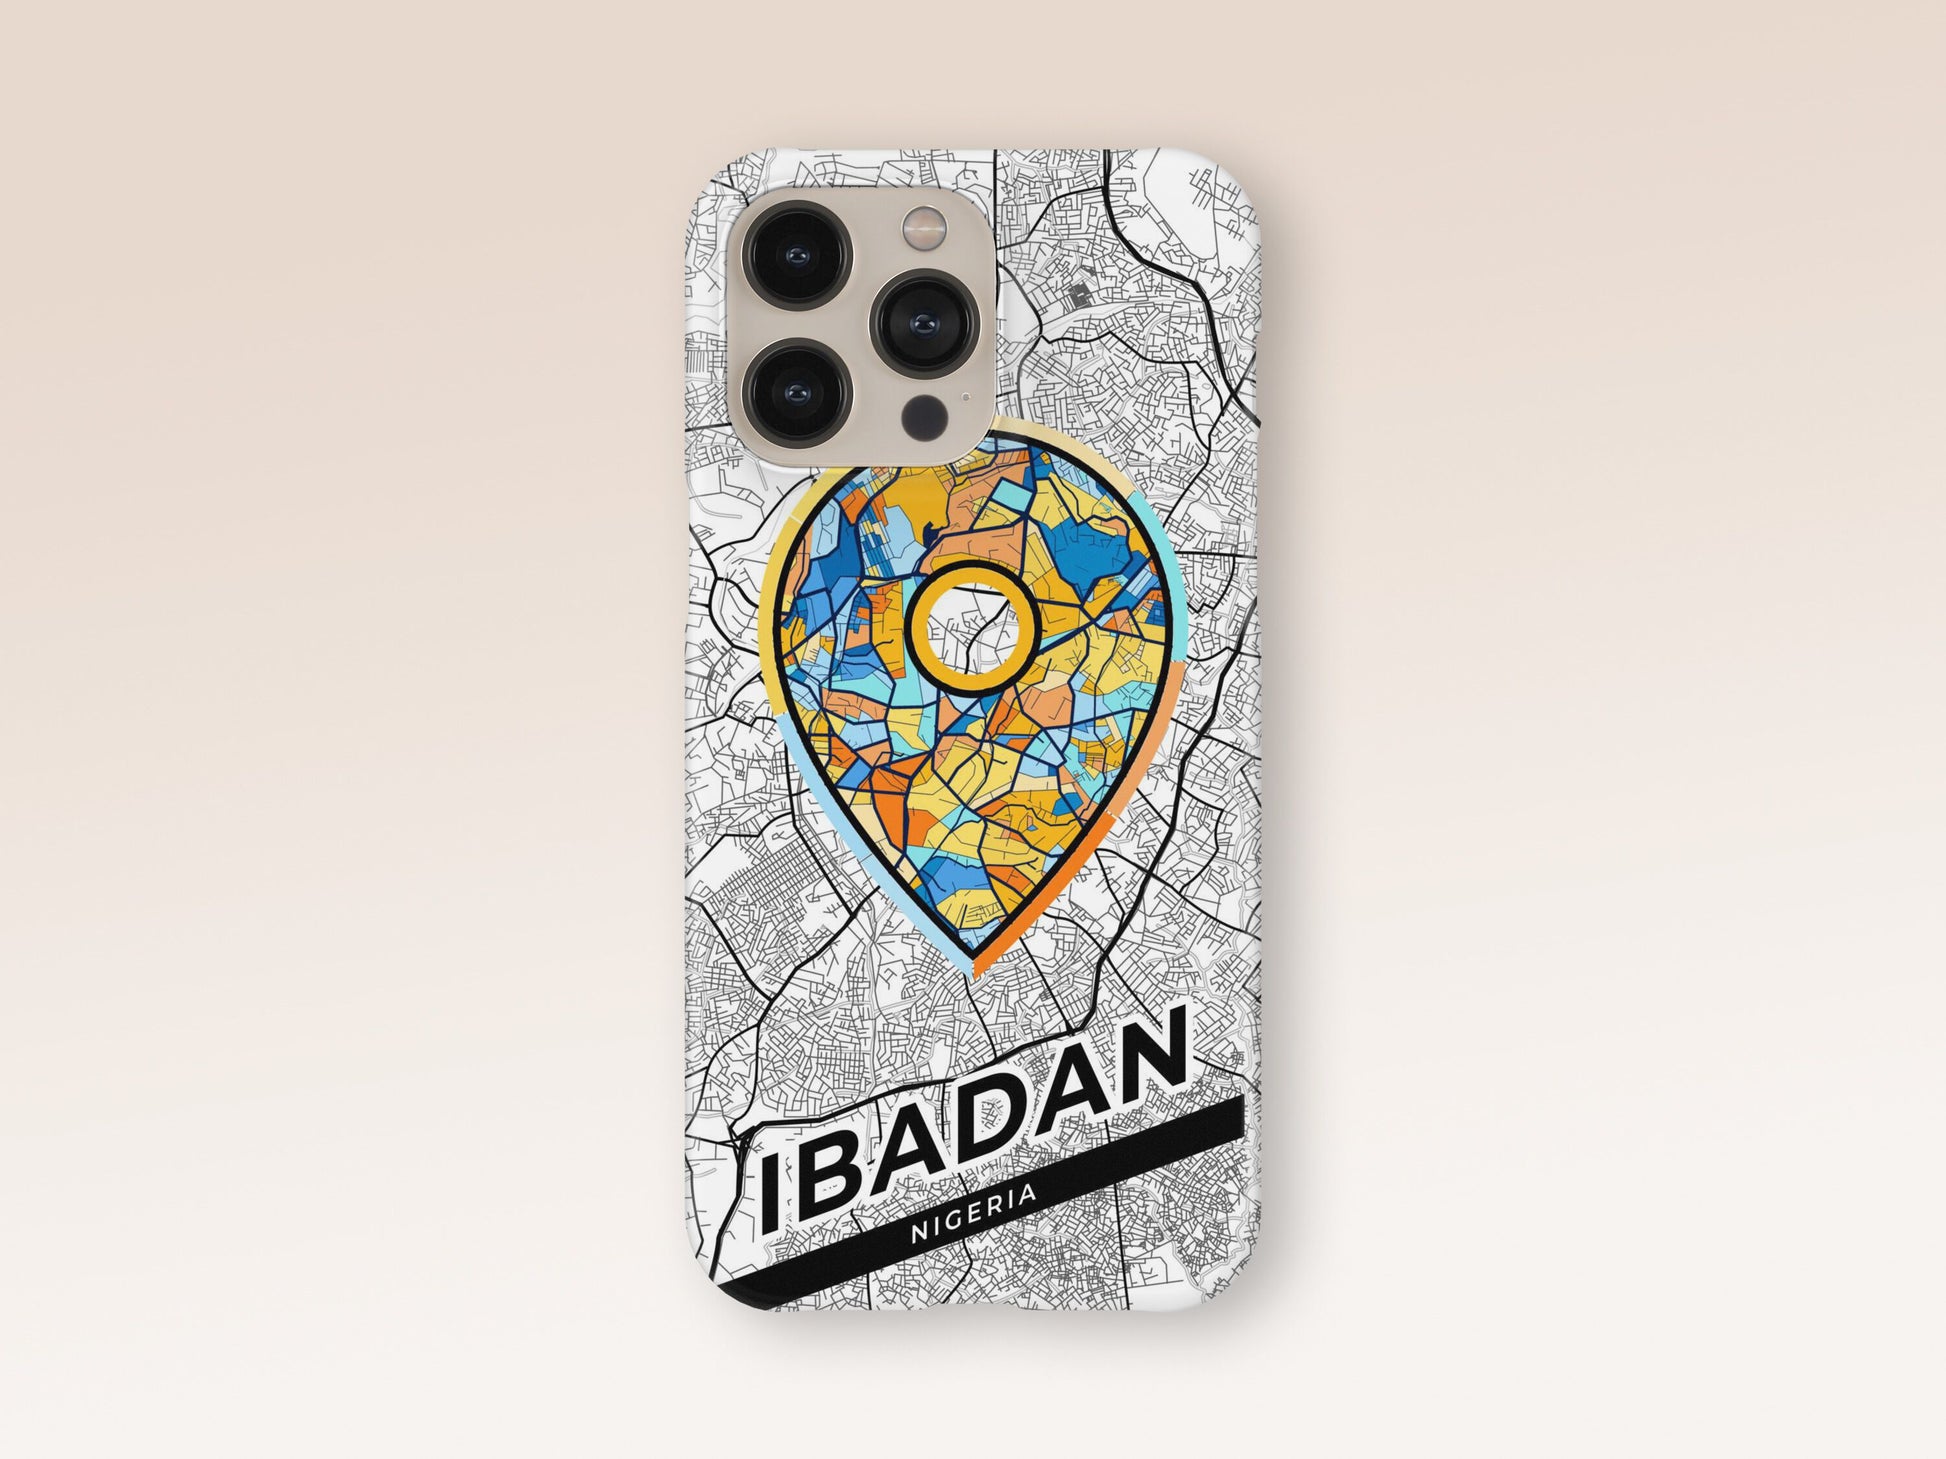 Ibadan Nigeria slim phone case with colorful icon. Birthday, wedding or housewarming gift. Couple match cases. 1